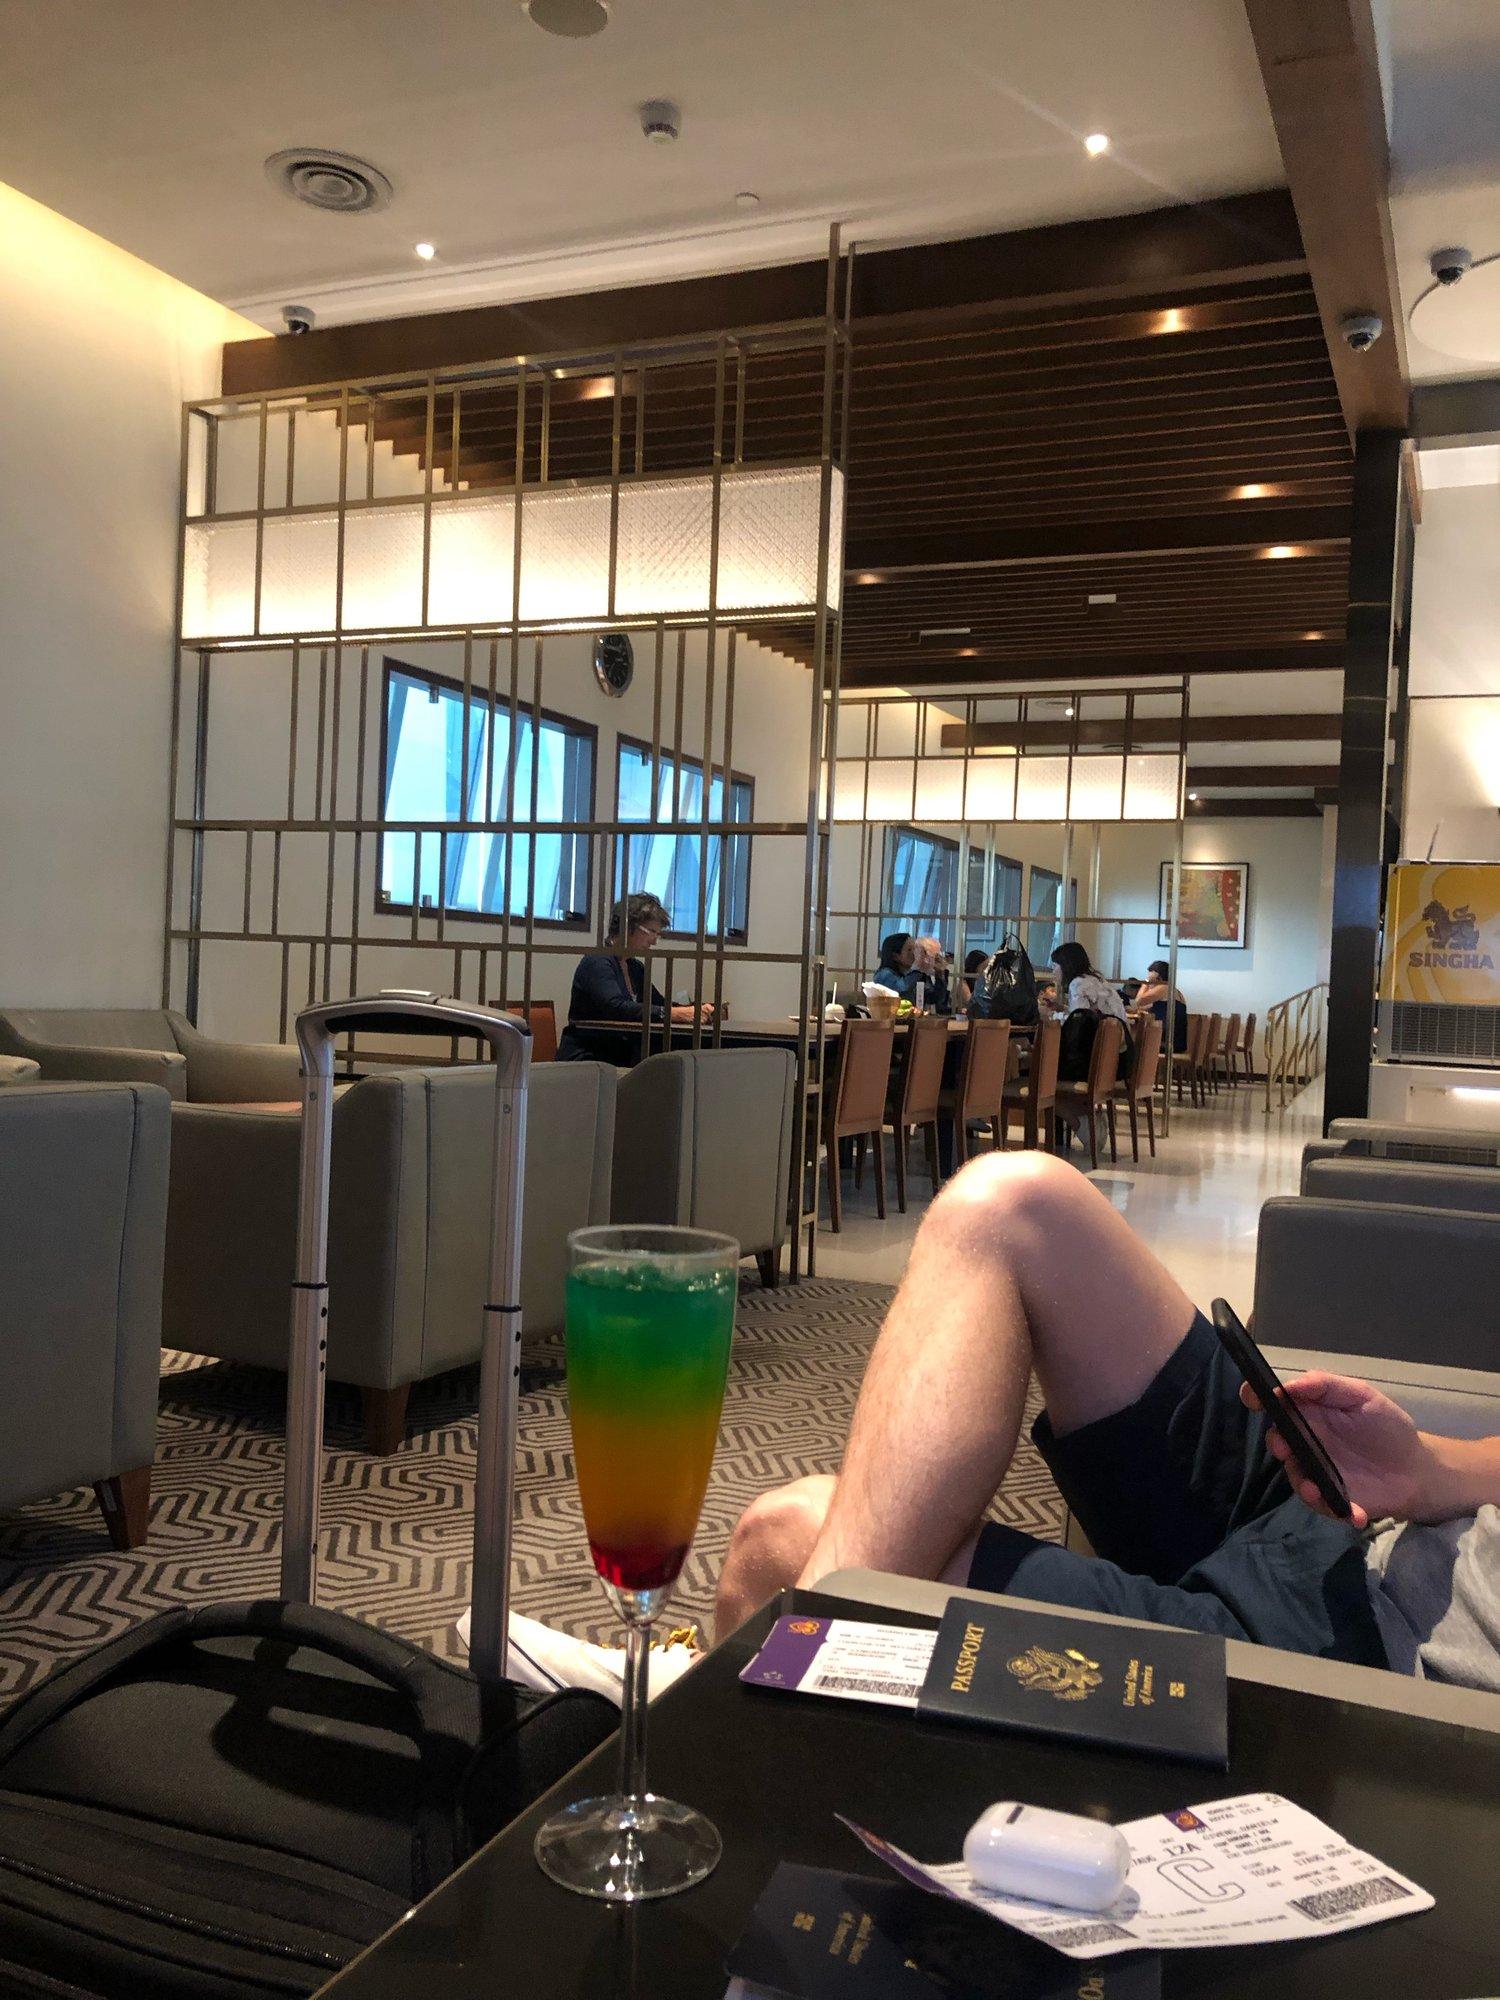 Singapore Airlines SilverKris Business Class Lounge image 6 of 16